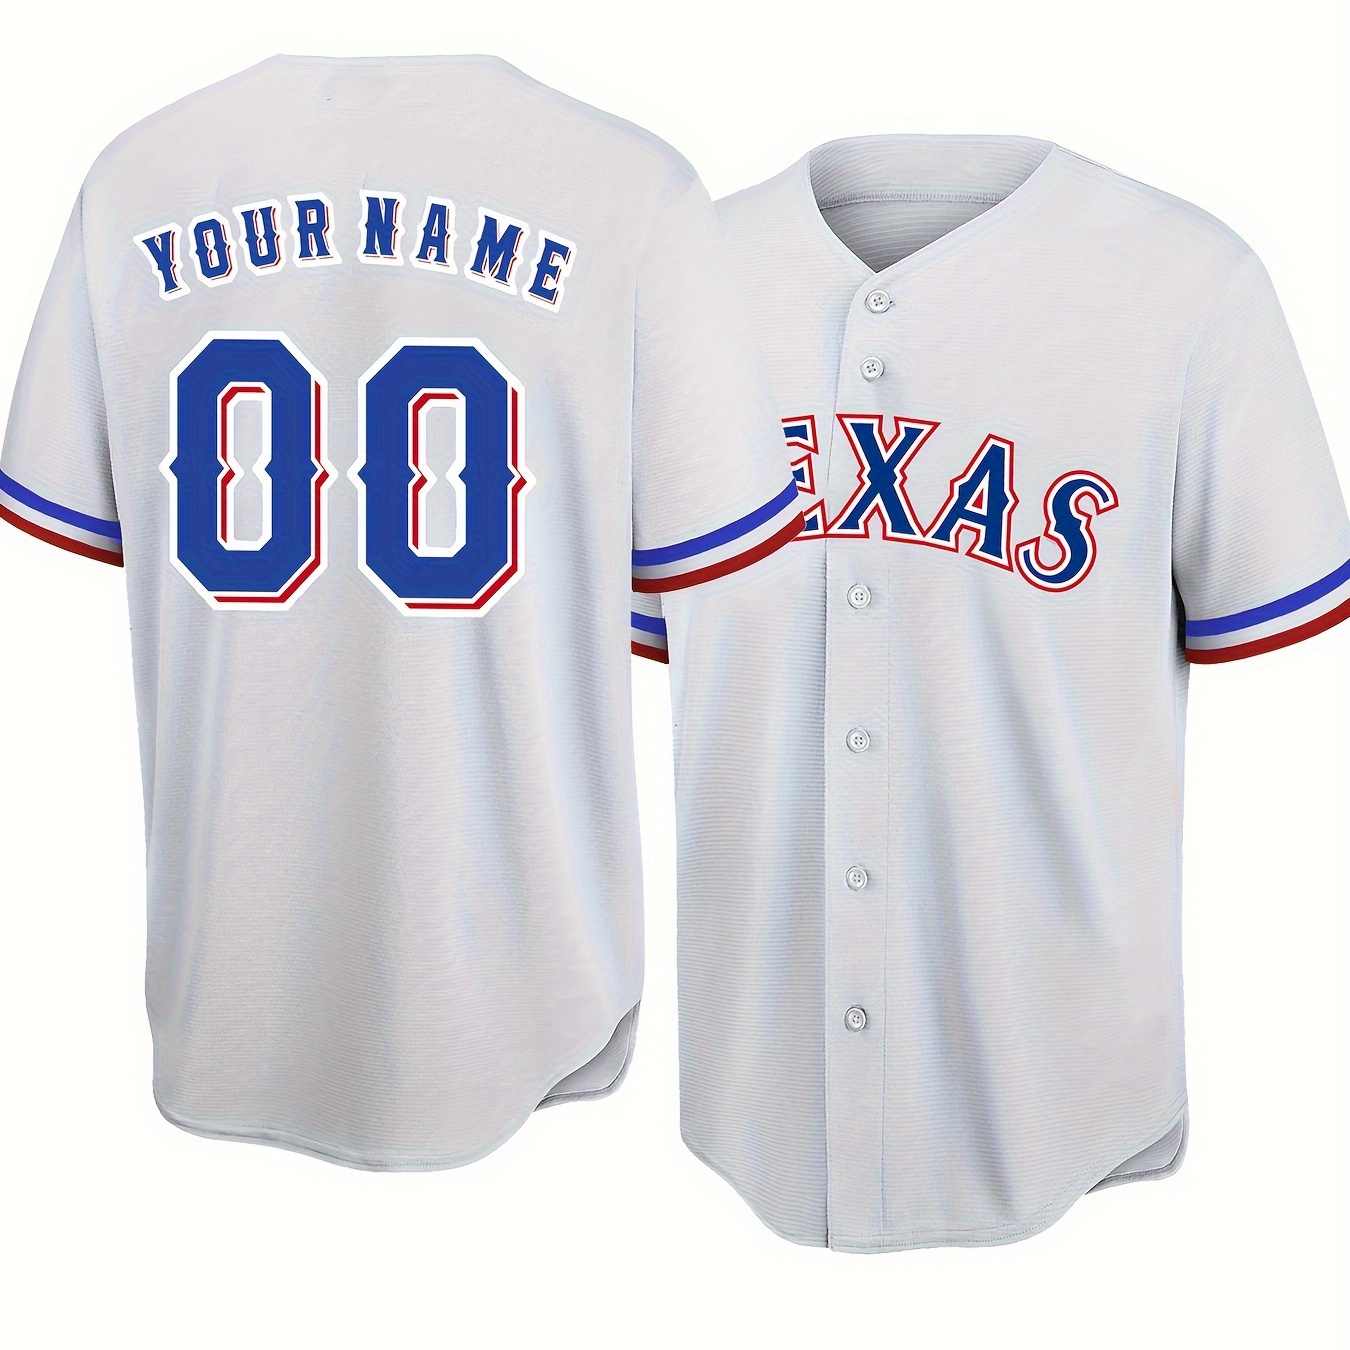 

Customized Name And Number Design, Men's Texas Embroidery Design Short Sleeve Loose Breathable V-neck Baseball Jersey, Sports Shirt For Team Training